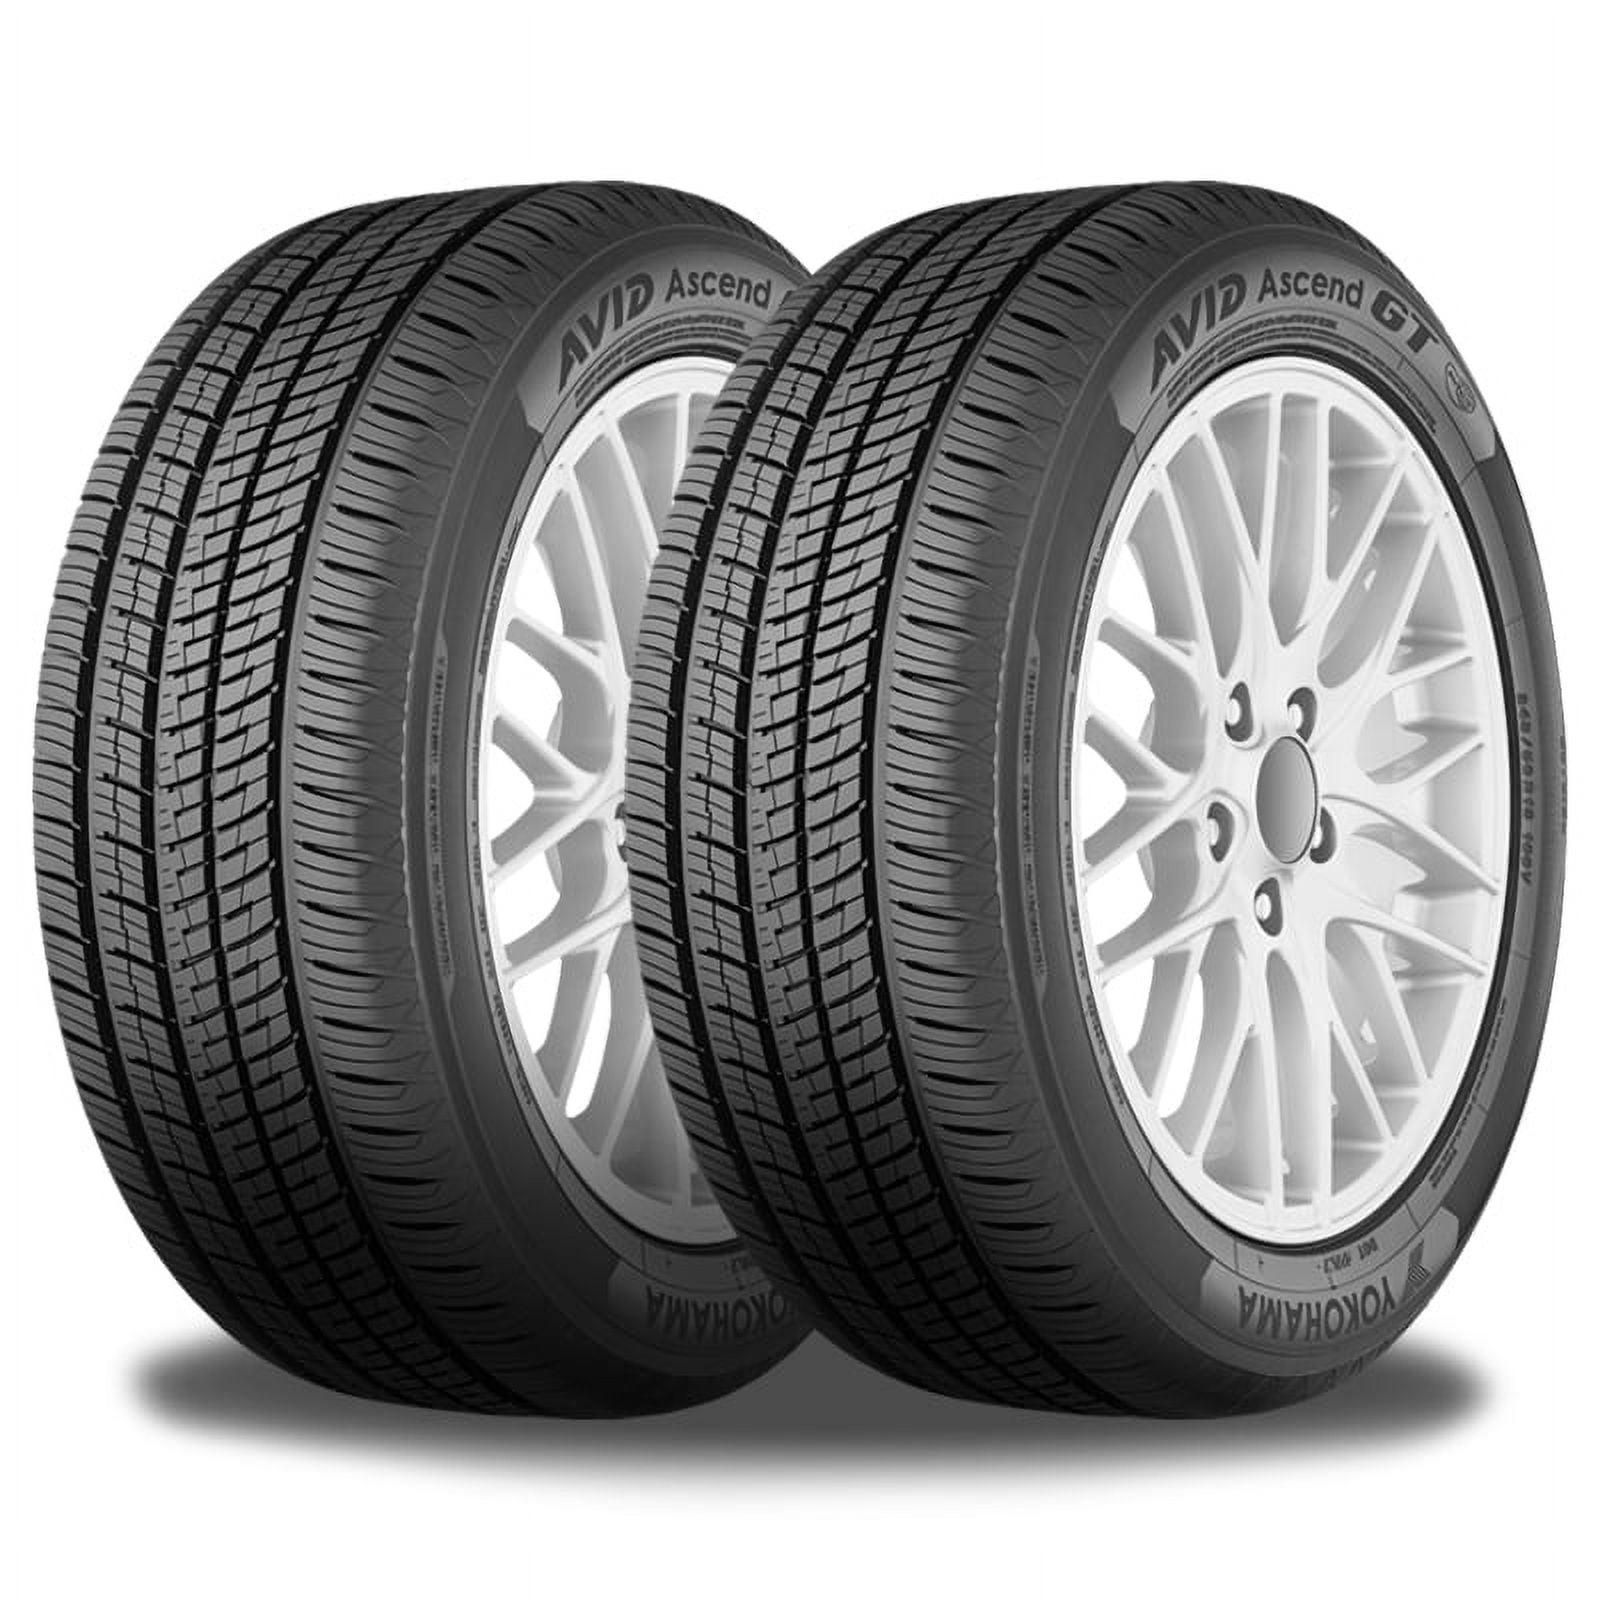 Set of 4 Yokohama Avid Ascend GT 225/45R18 95V Tires 110132733 / 225/45/18  / 2254518 Fits: 2012 Toyota Camry XLE, 2008-12 Ford Fusion SEL